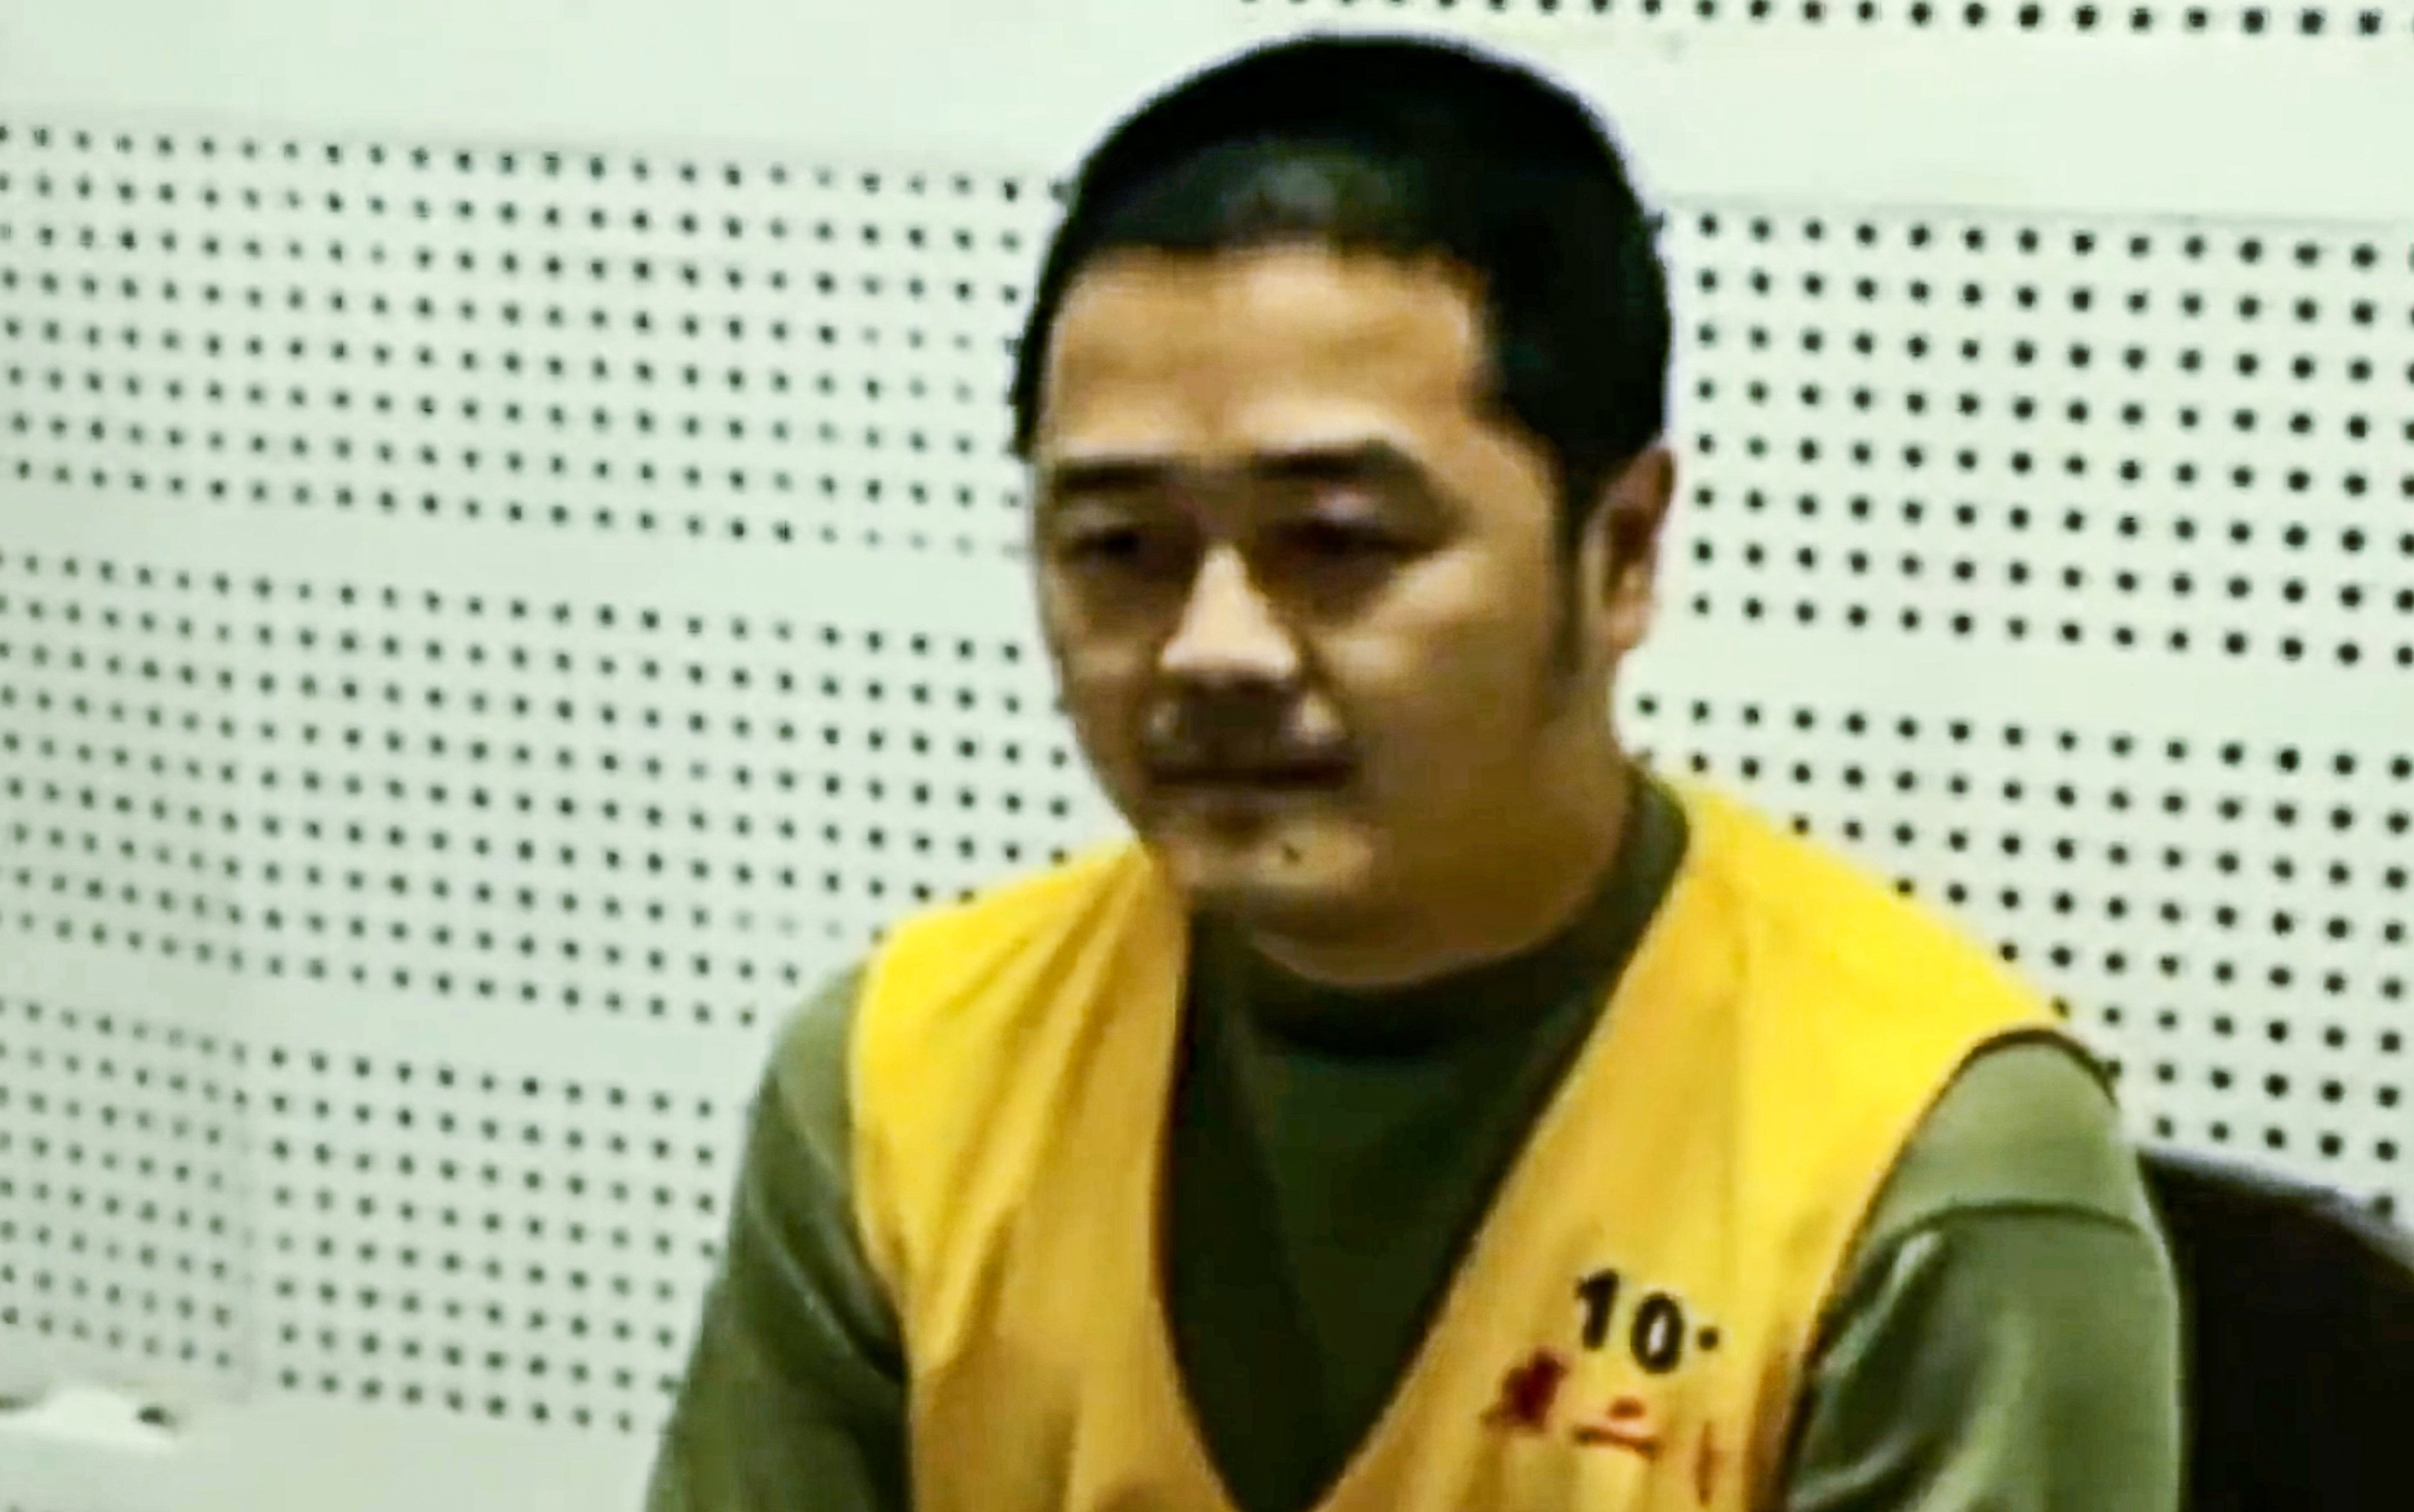 Huang Yu’s case featured in a government-produced documentary aired on state television. Photo: CCTV